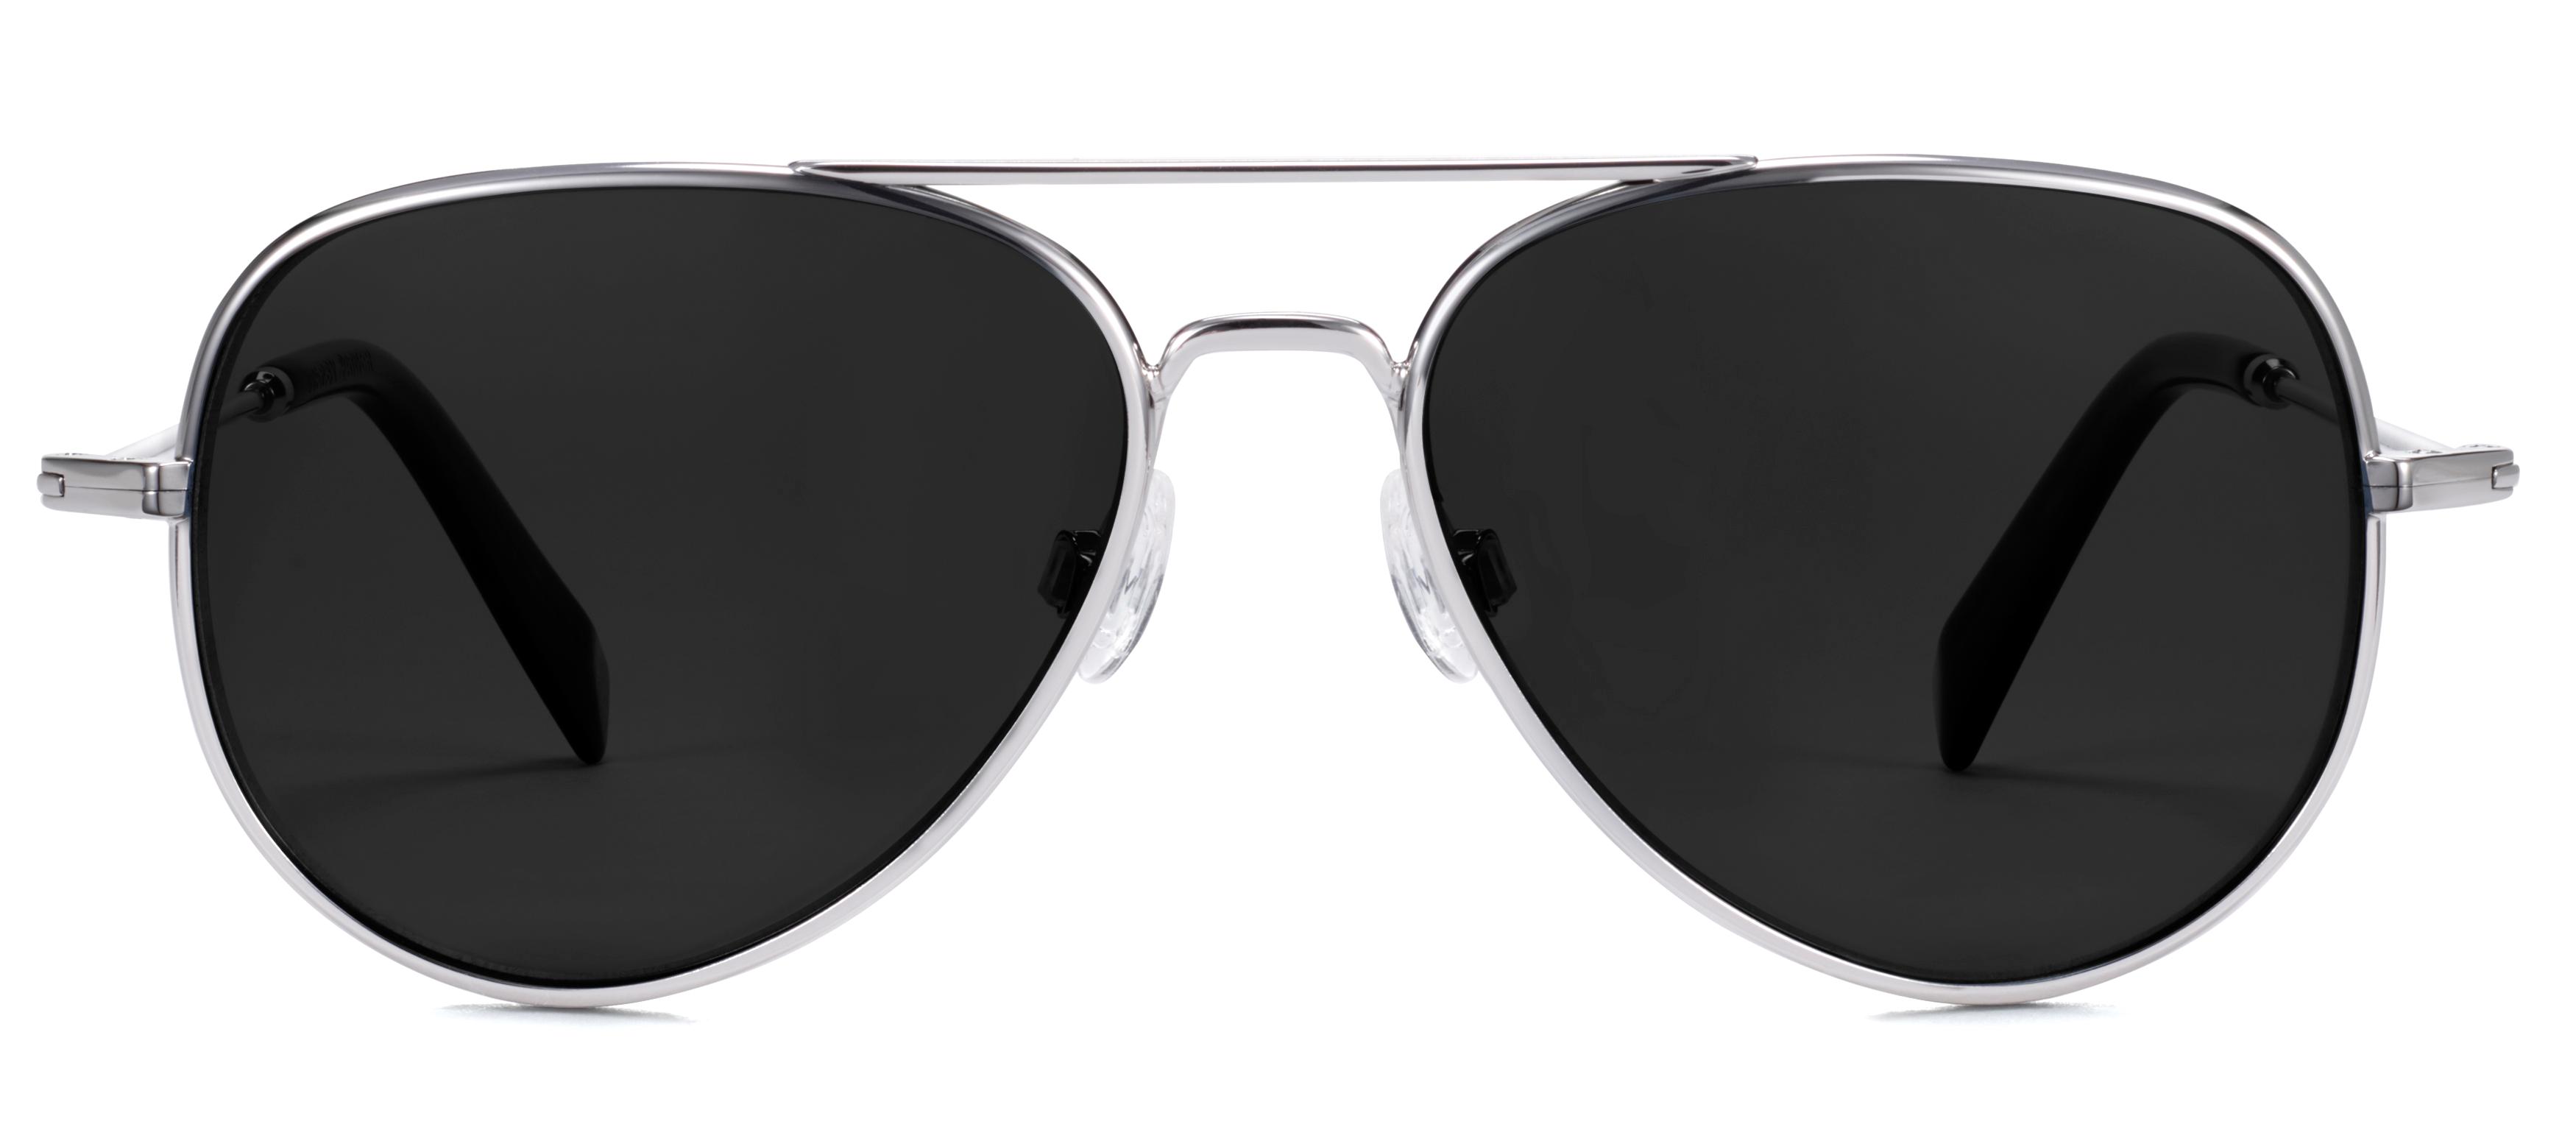 Raider Sunglasses in Brushed Ink